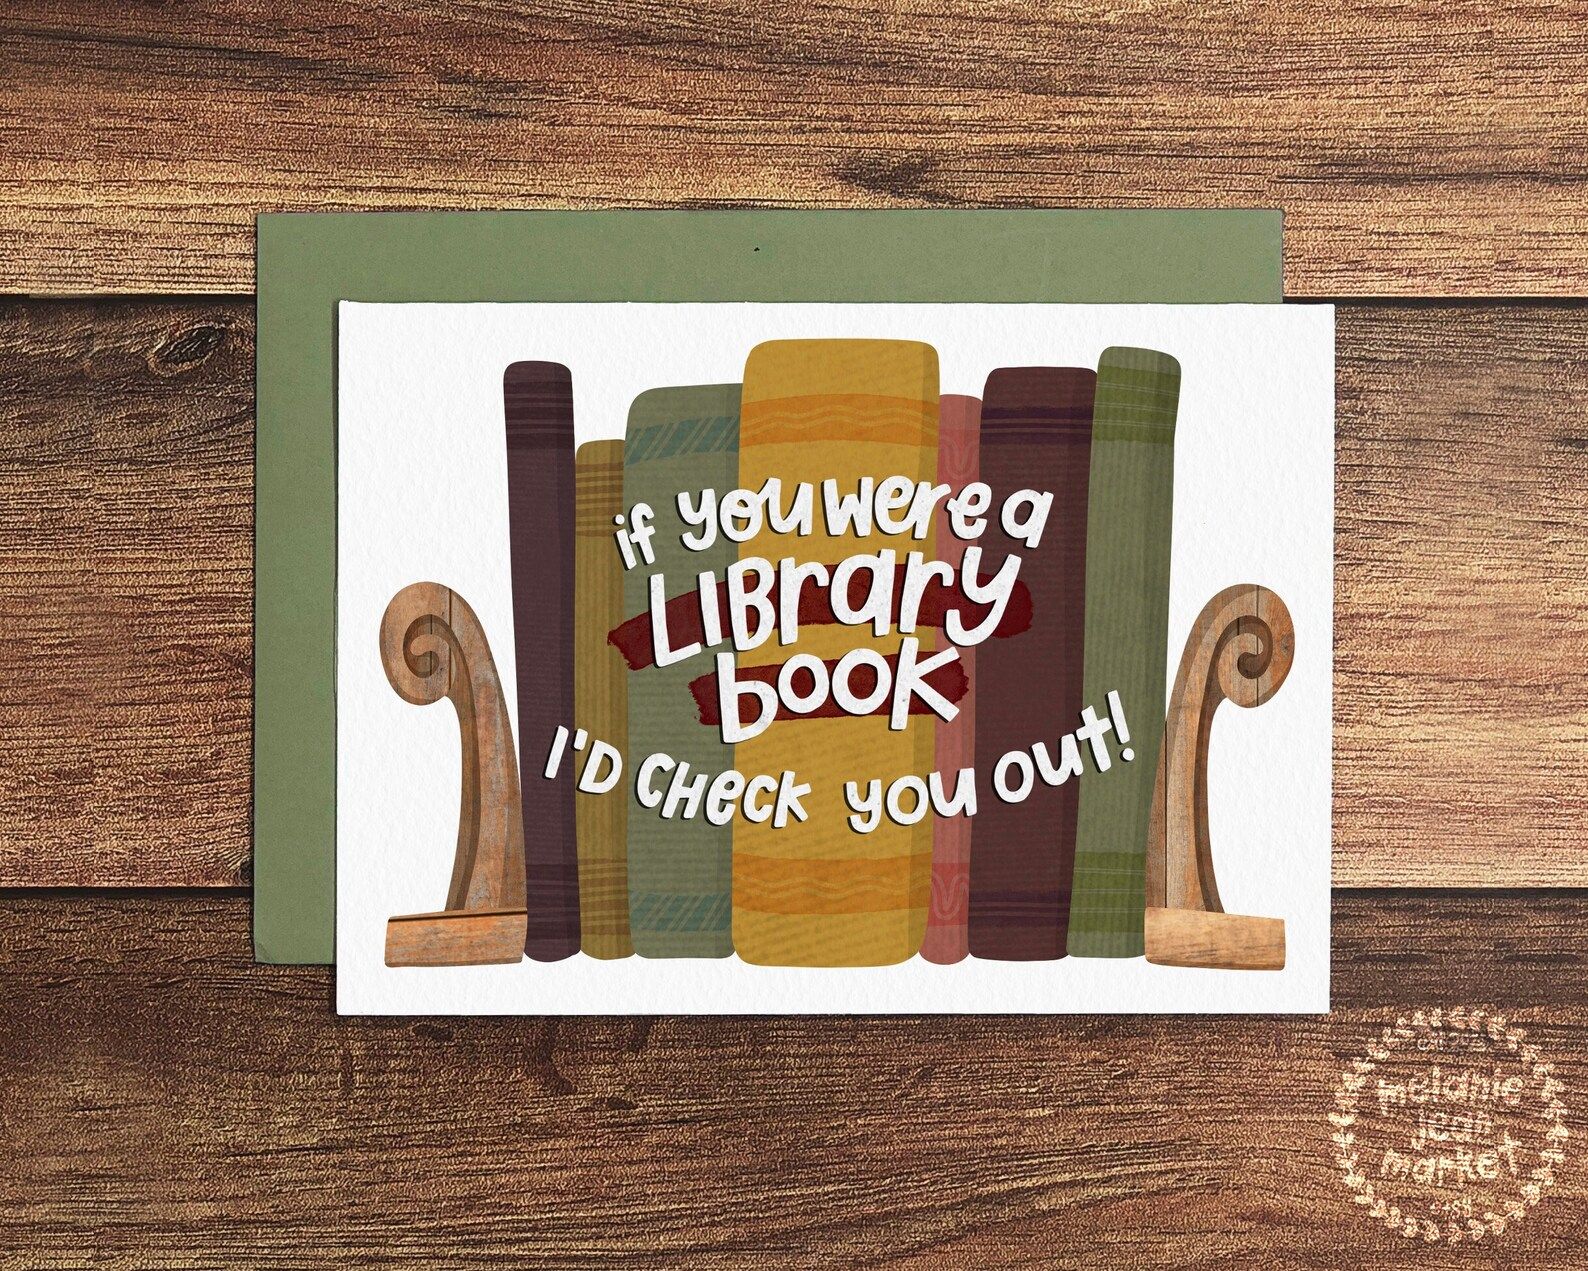 A greeting card with books on the front and the words "If you were a library book, I'd check you out."